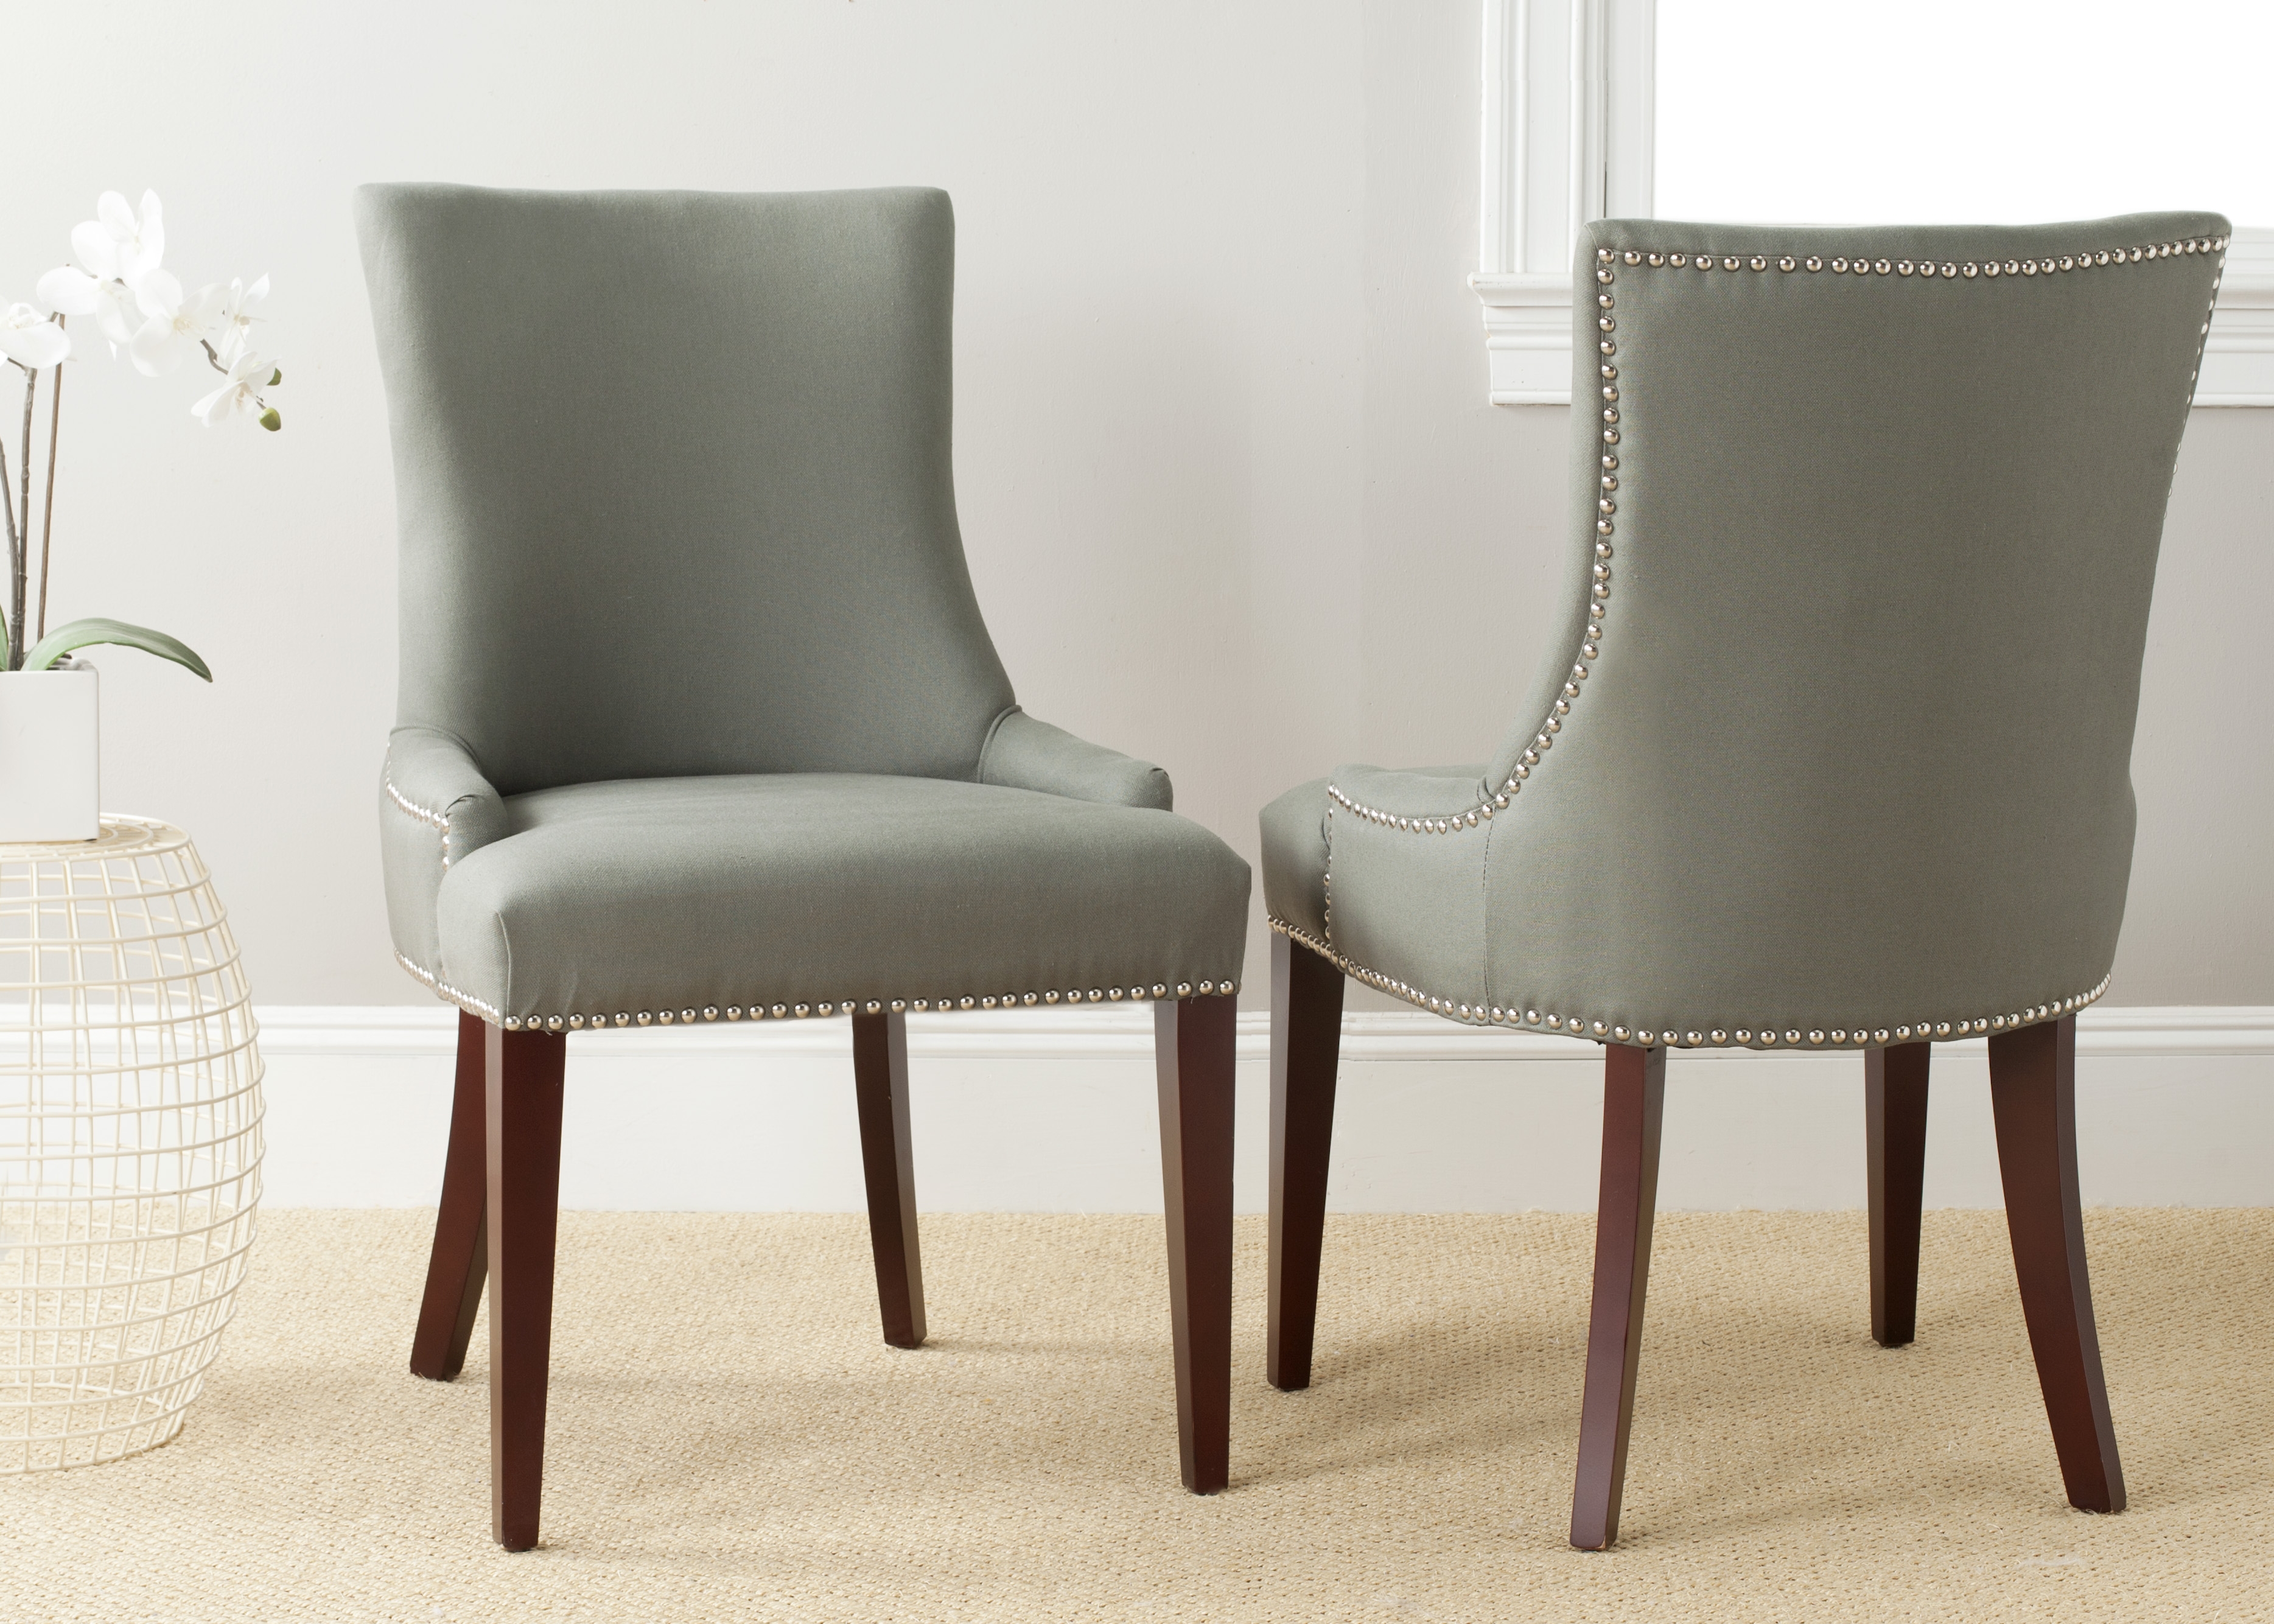 Becca 19''H Leather Side Chair - Silver Nail Heads - Sea Mist/Cherry Mahogany - Arlo Home - Image 2